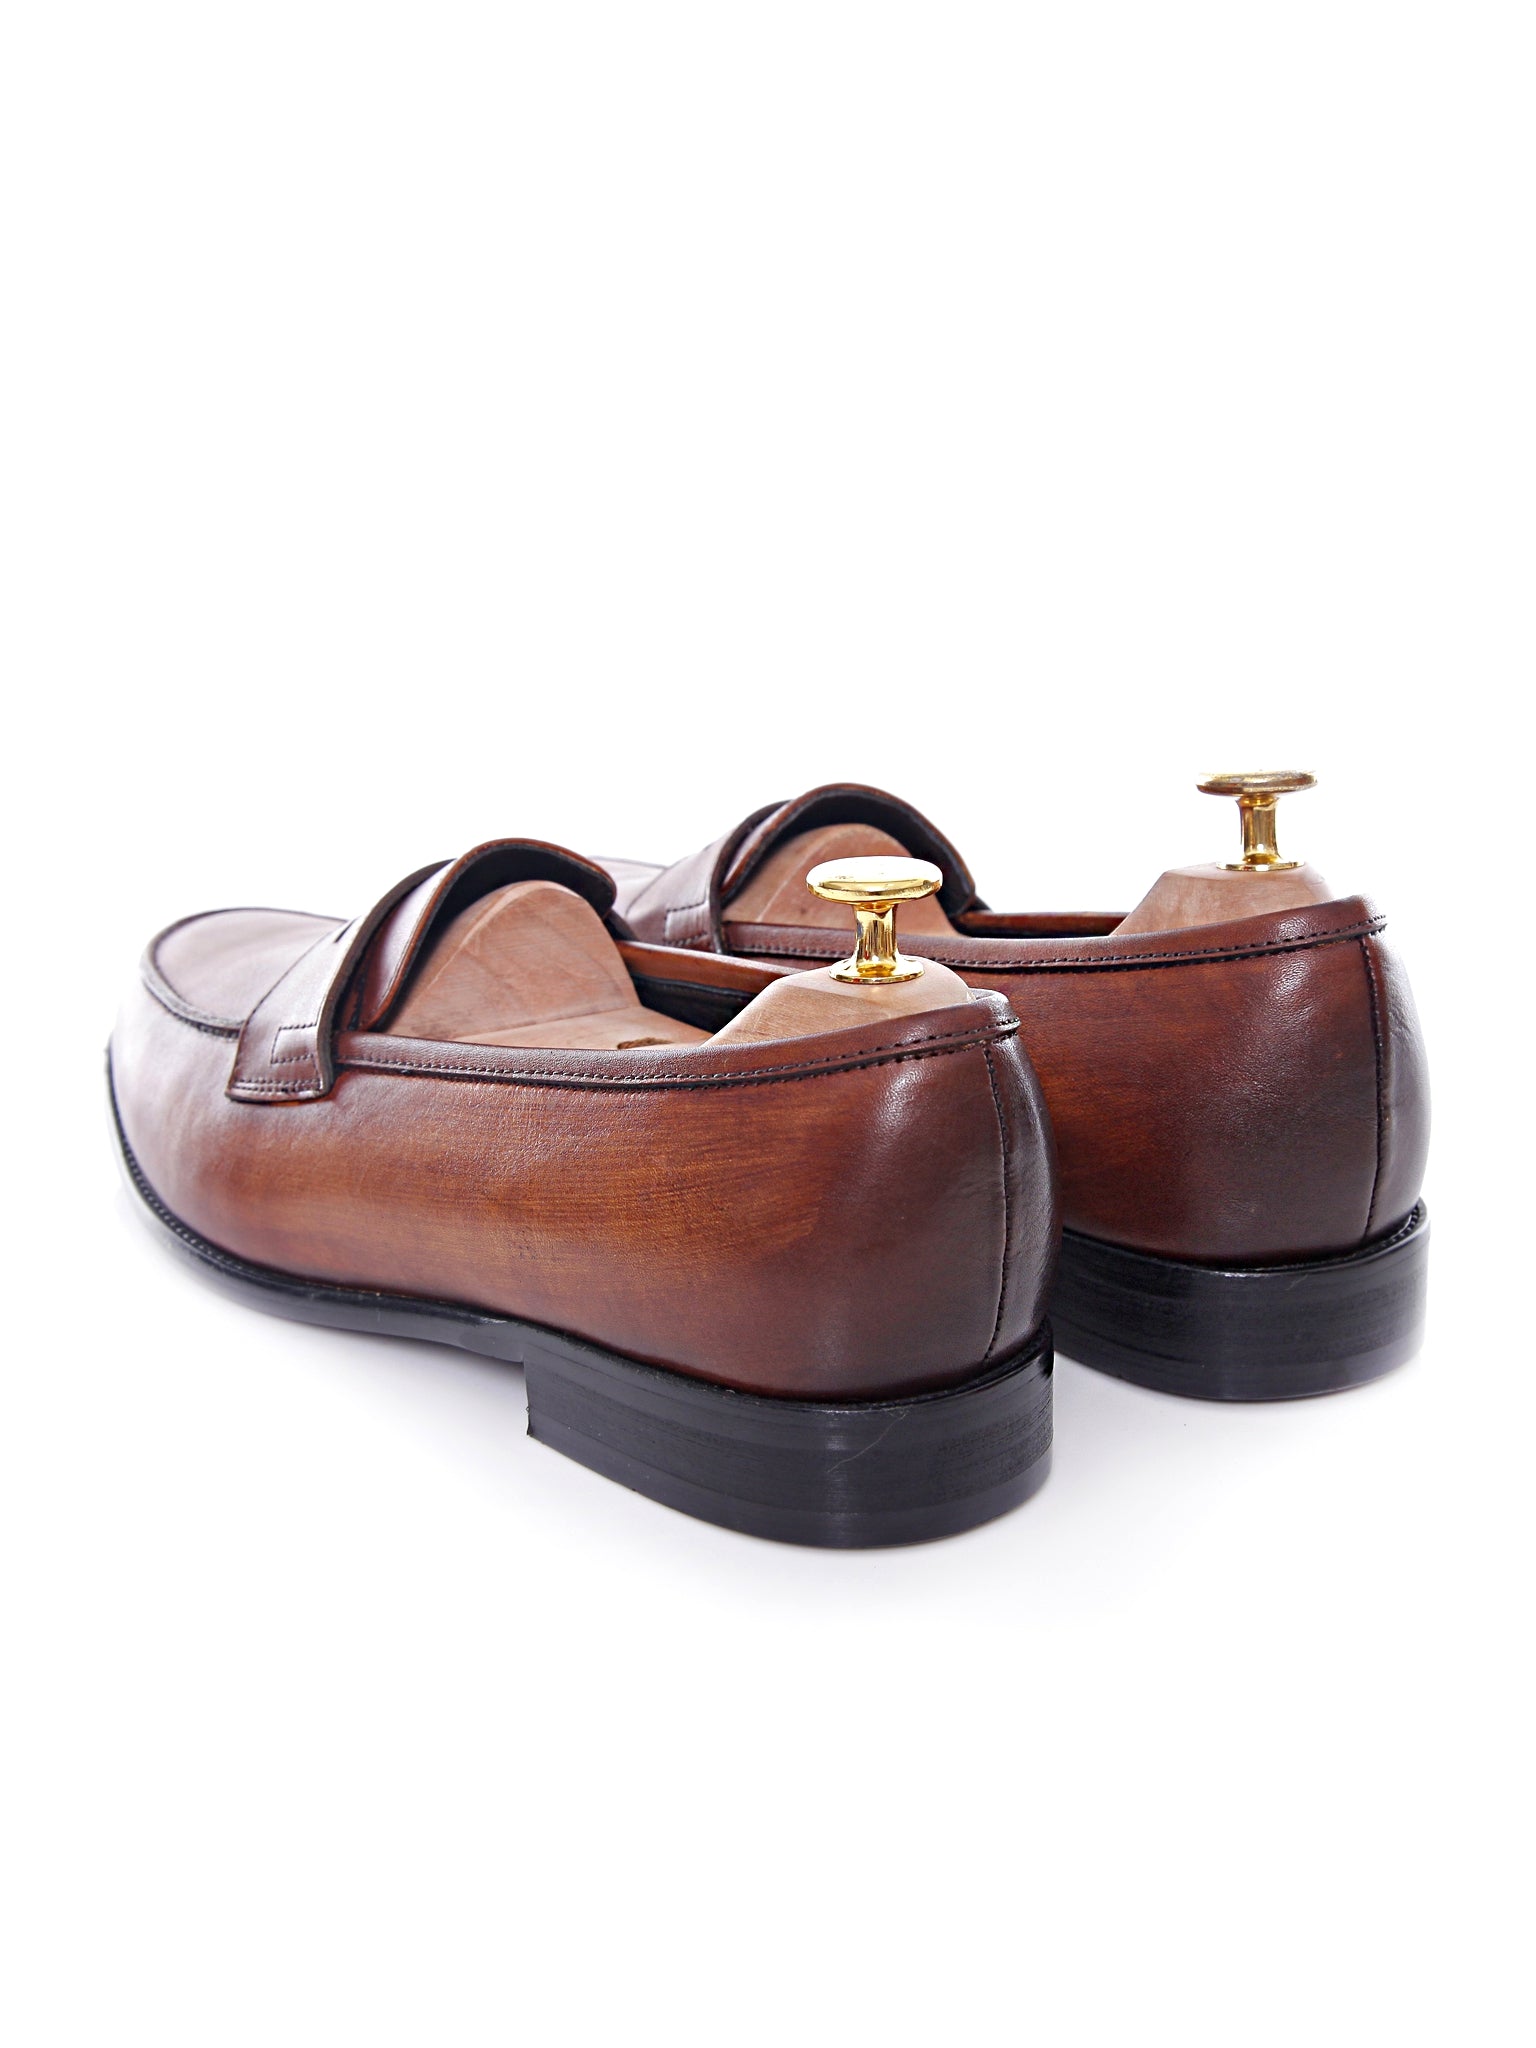 Penny Loafer - Cognac Tan (Hand Painted Patina) - Zeve Shoes